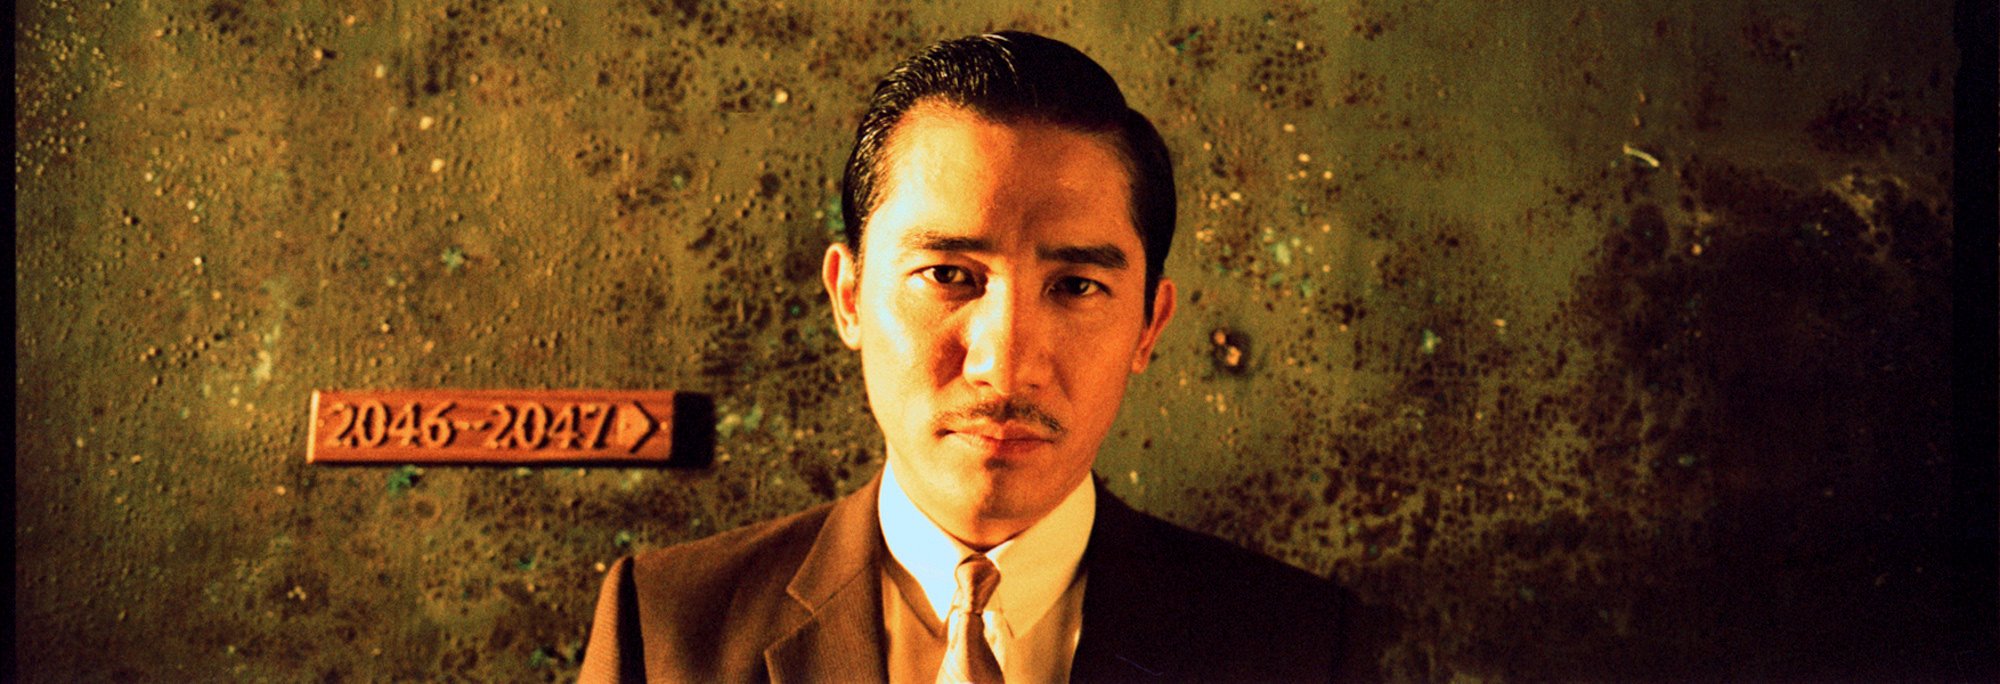 Tony Leung Chiu-wai in a still from the film 2046 (2004). Photo: Handout